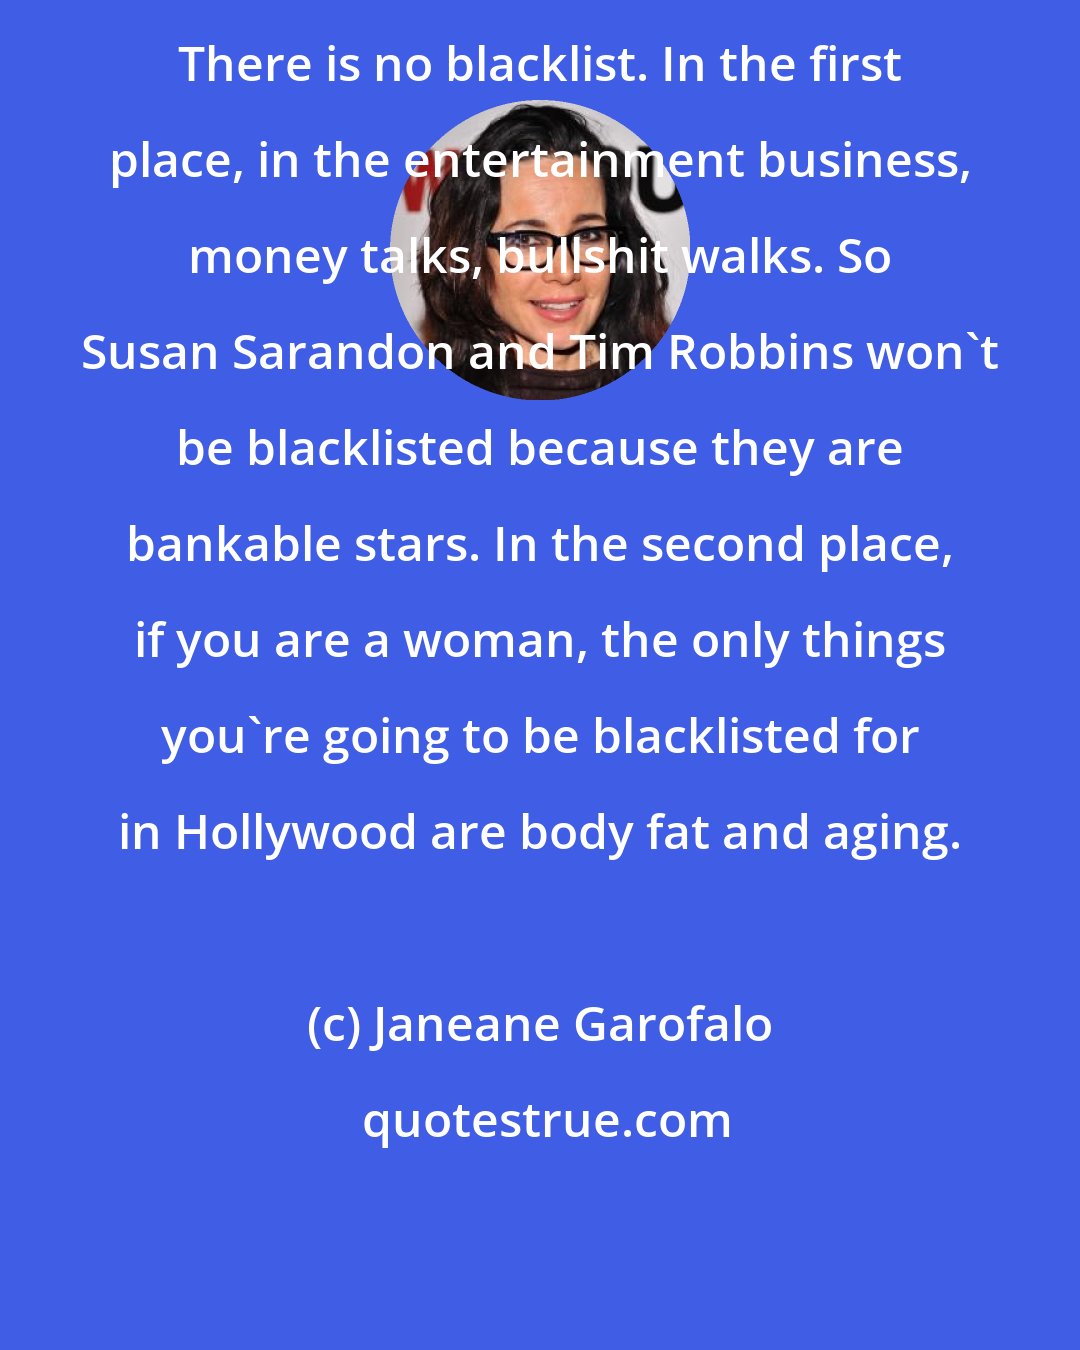 Janeane Garofalo: There is no blacklist. In the first place, in the entertainment business, money talks, bullshit walks. So Susan Sarandon and Tim Robbins won't be blacklisted because they are bankable stars. In the second place, if you are a woman, the only things you're going to be blacklisted for in Hollywood are body fat and aging.